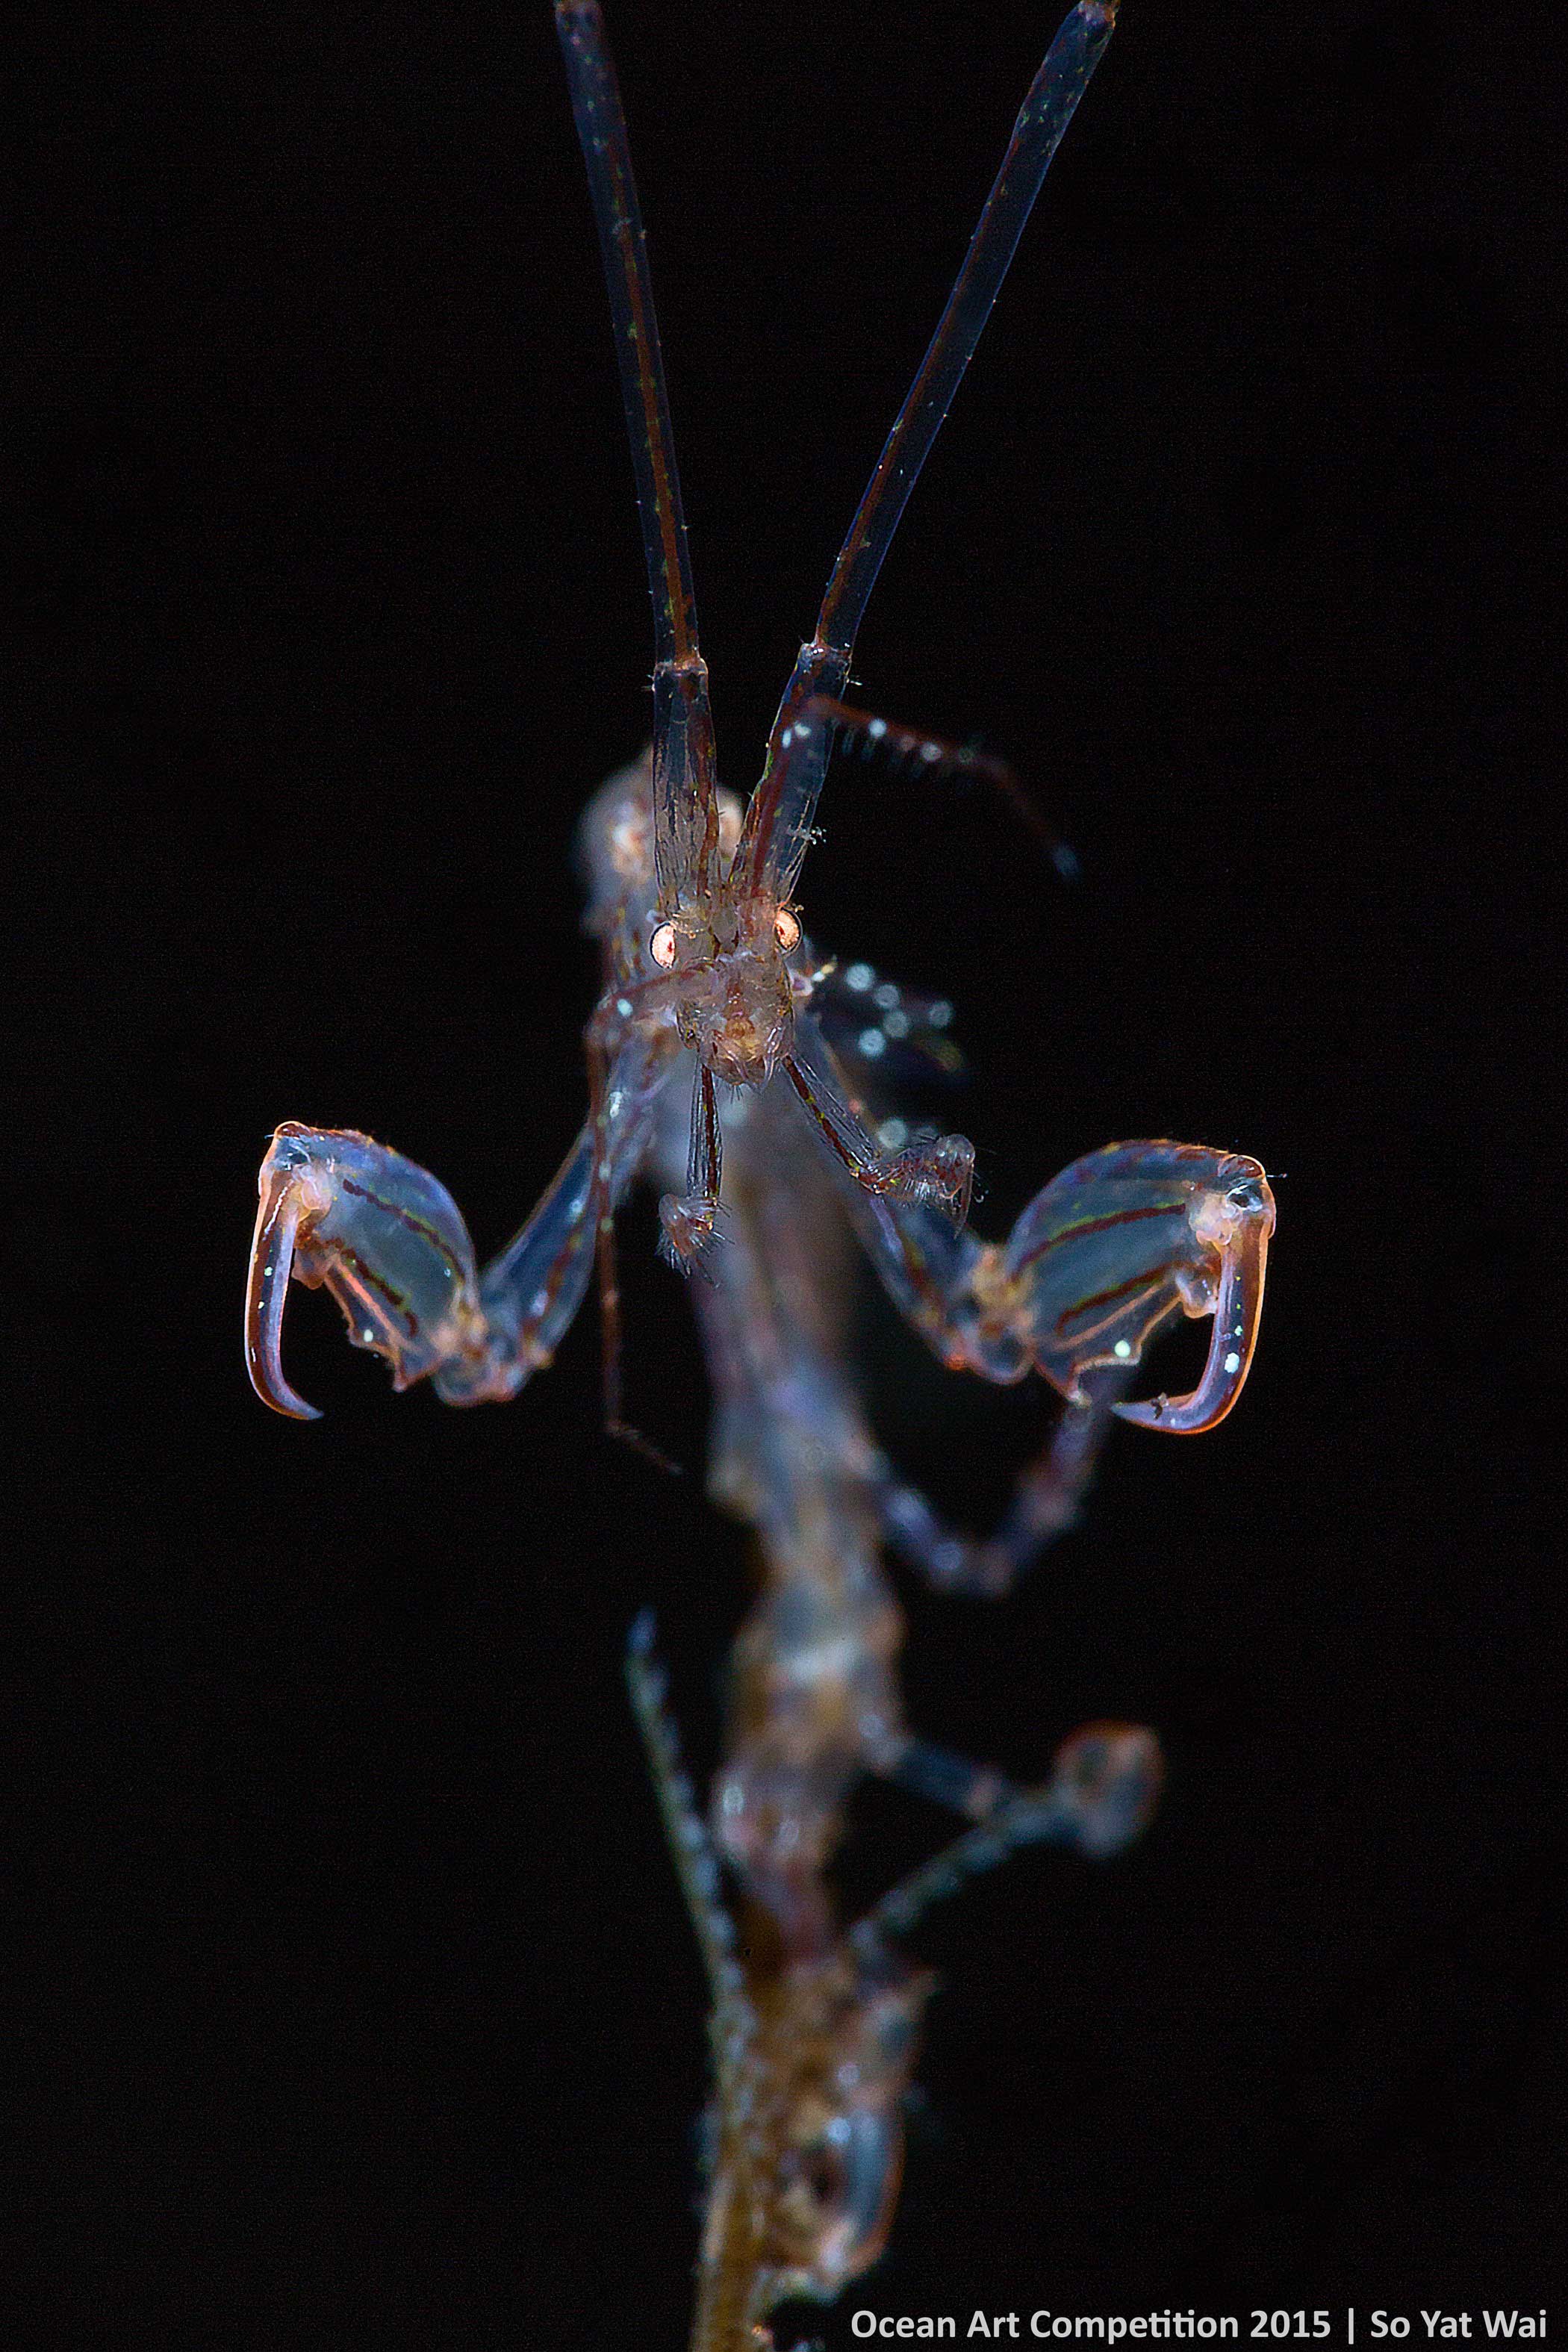 Owing to the shallow depth of field of super macro photography, it is hard to get both claws, face and tentacles in focus. Therefore i had kept shooting when I felt all of these target points nearly rest in same focal plane. I took around 60 shoots in order to get the skeleton shrimp stay in the centre of the frame and all target points in sharp focus.  - So Yat Wai